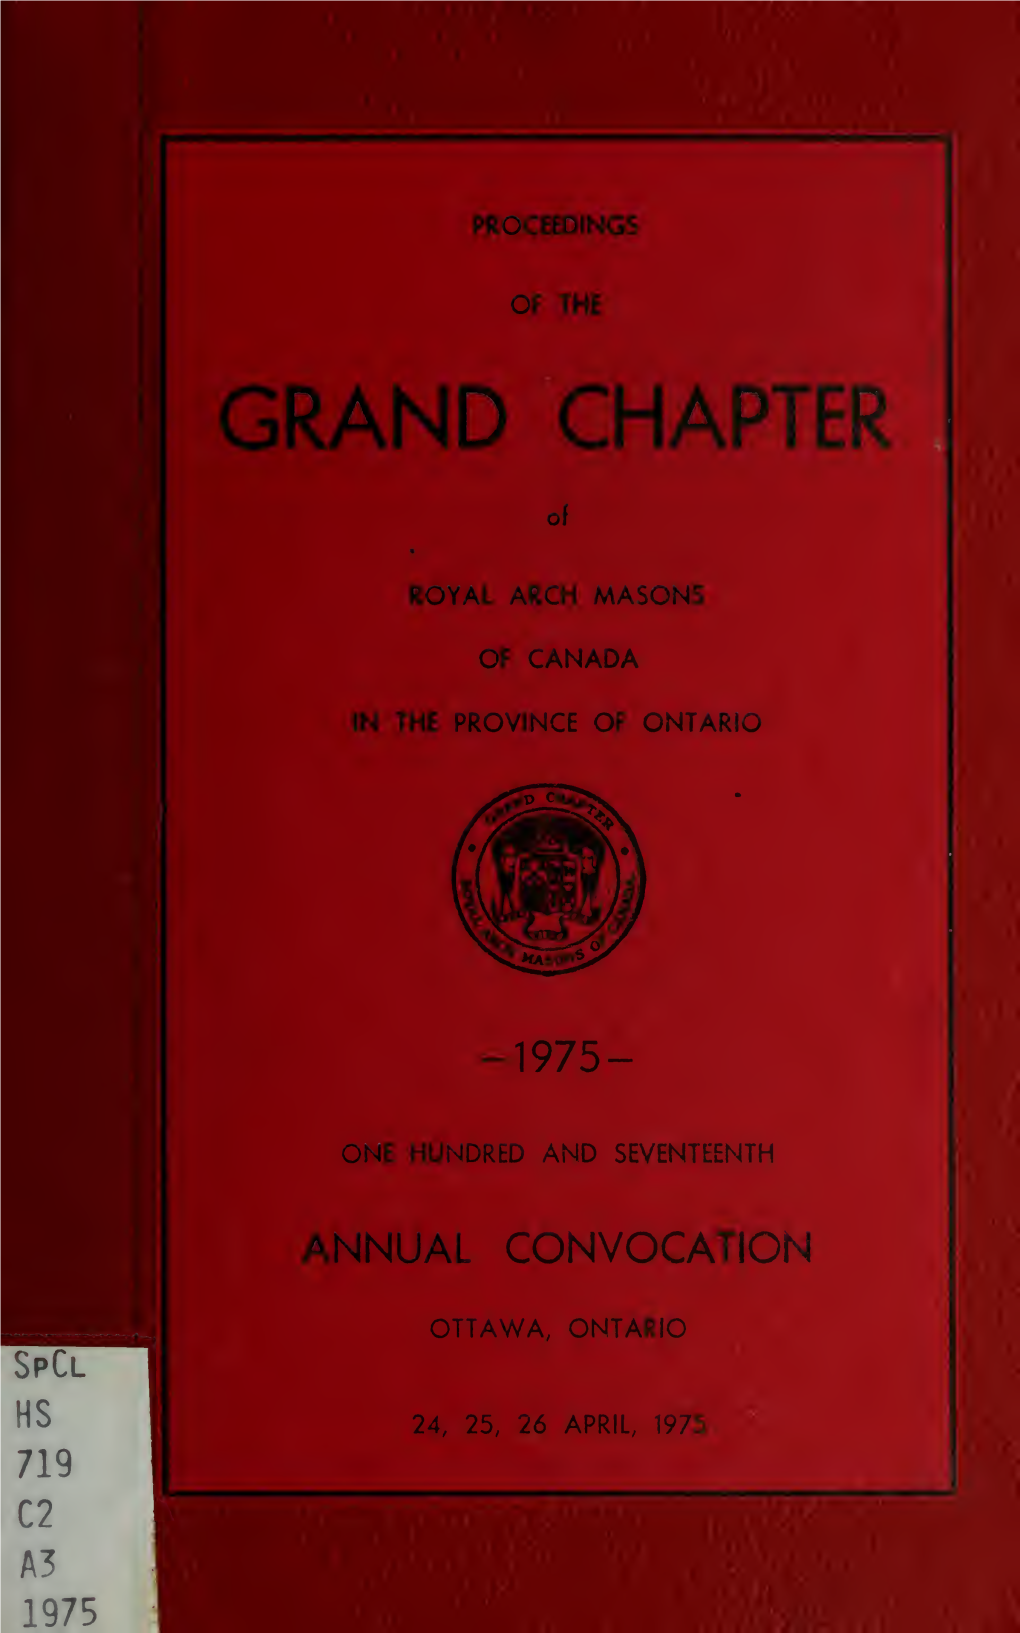 Proceedings of the Grand Chapter of Royal Arch Masons of Canada At